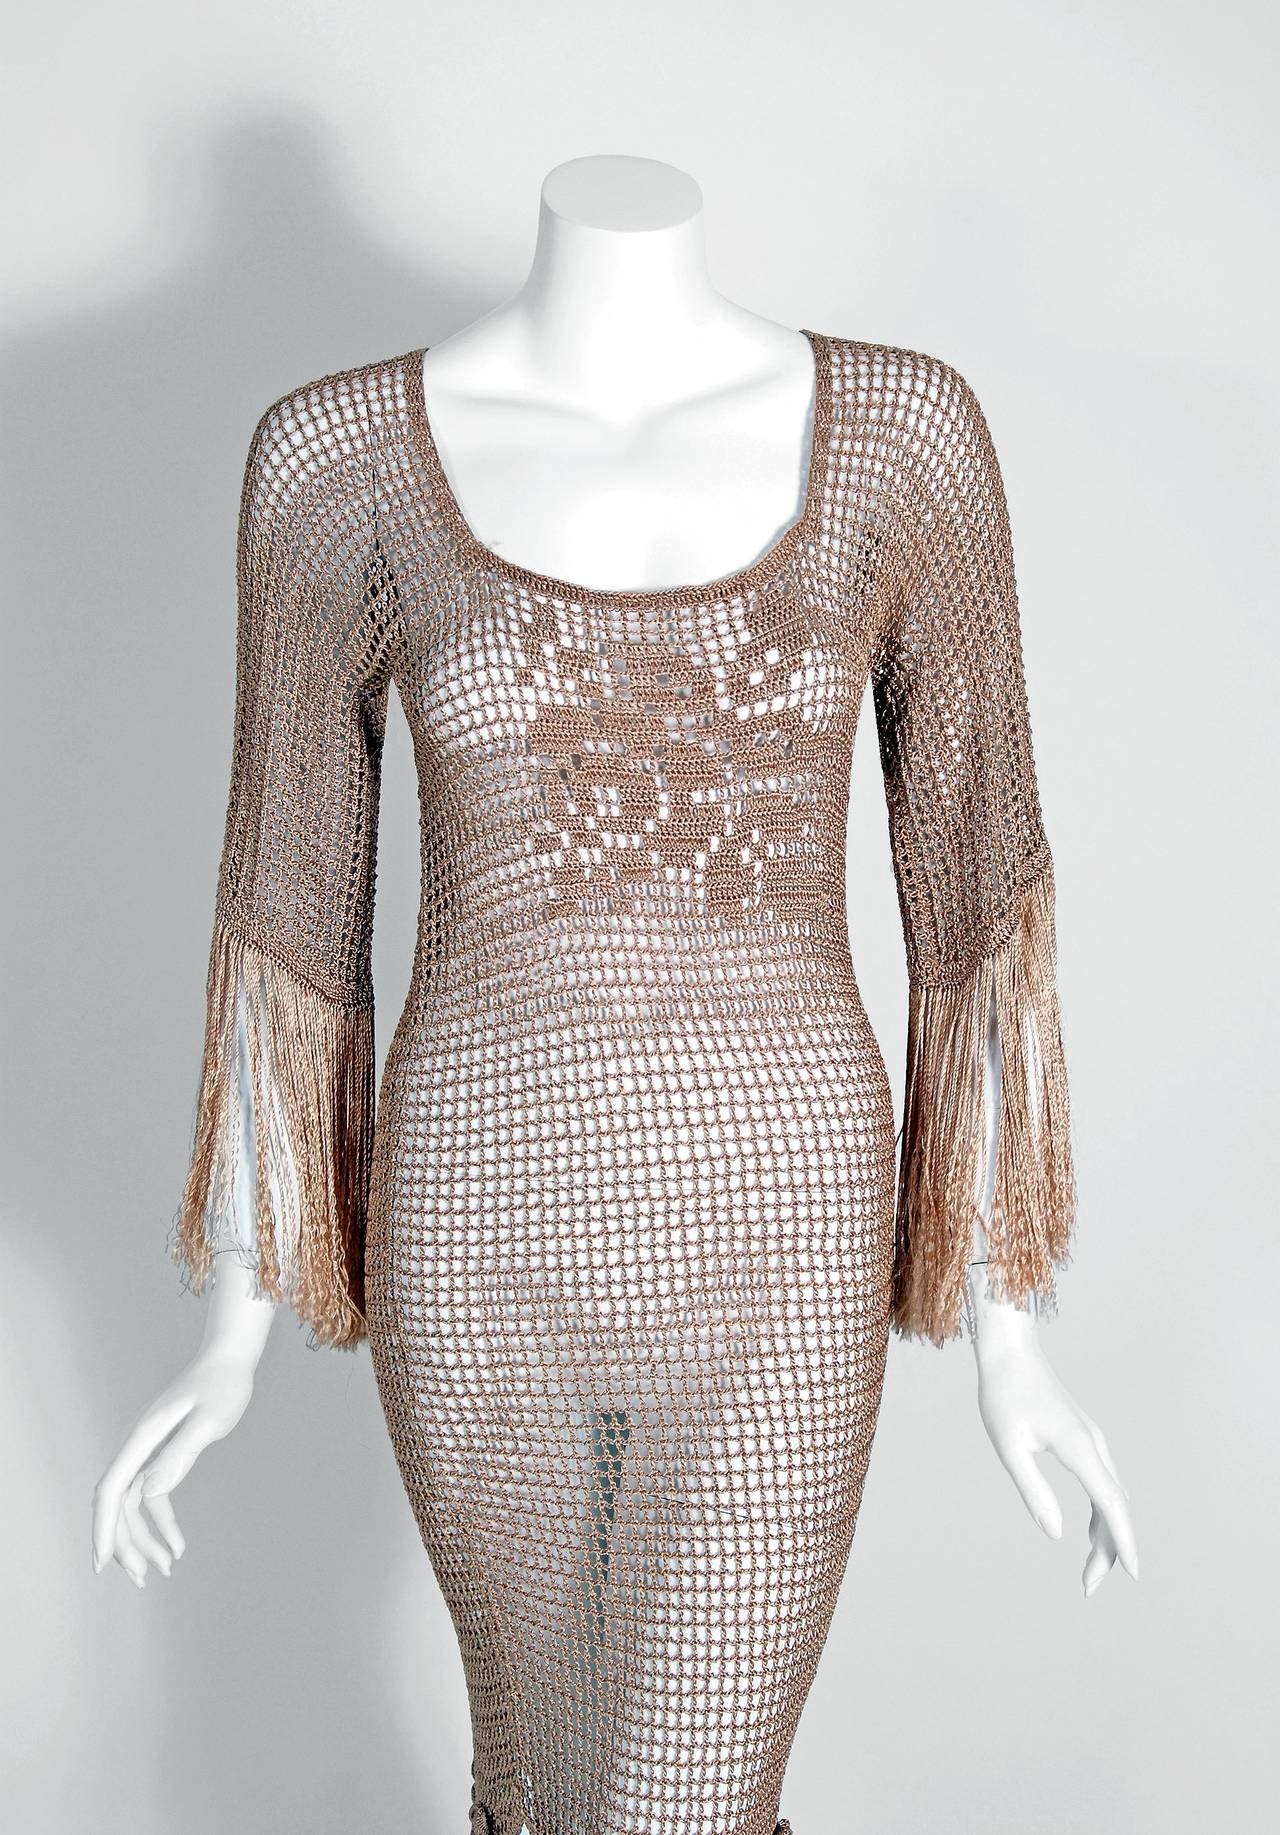 An alluring nude silk-knit crochet gown from the 